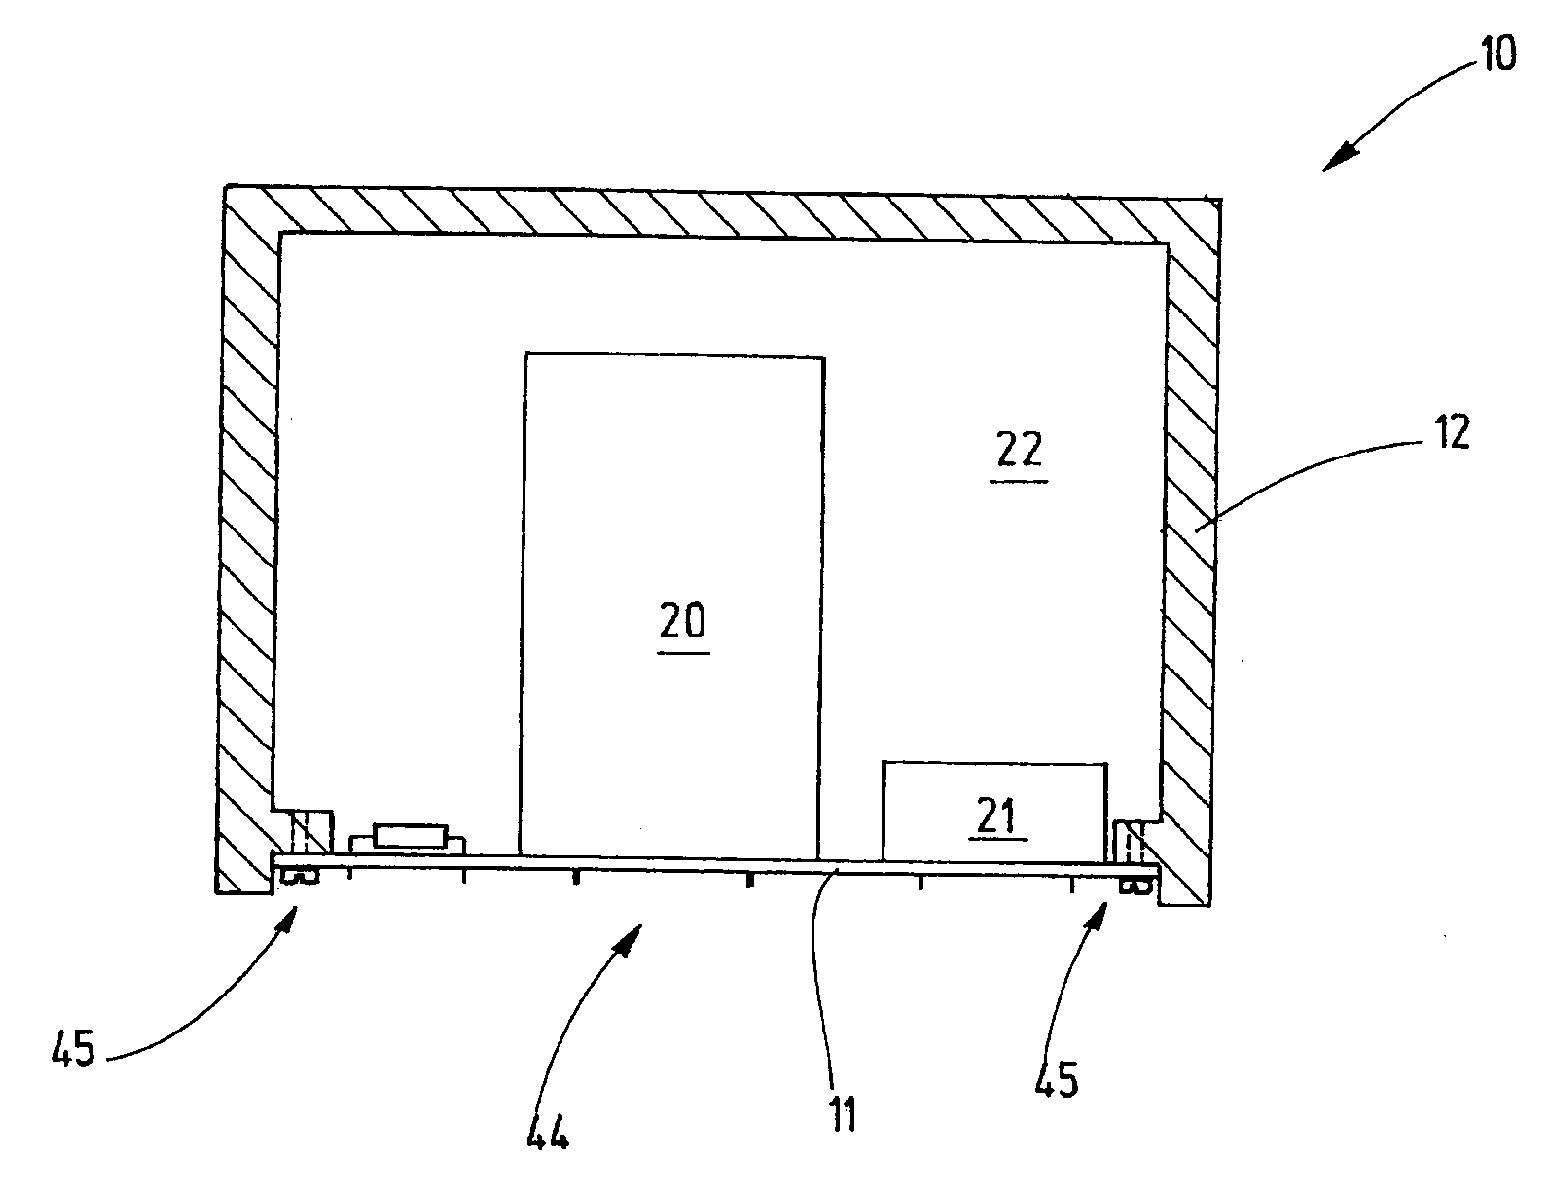 Printed circuit board with partial housing encapsulated in a pressure-resistant manner